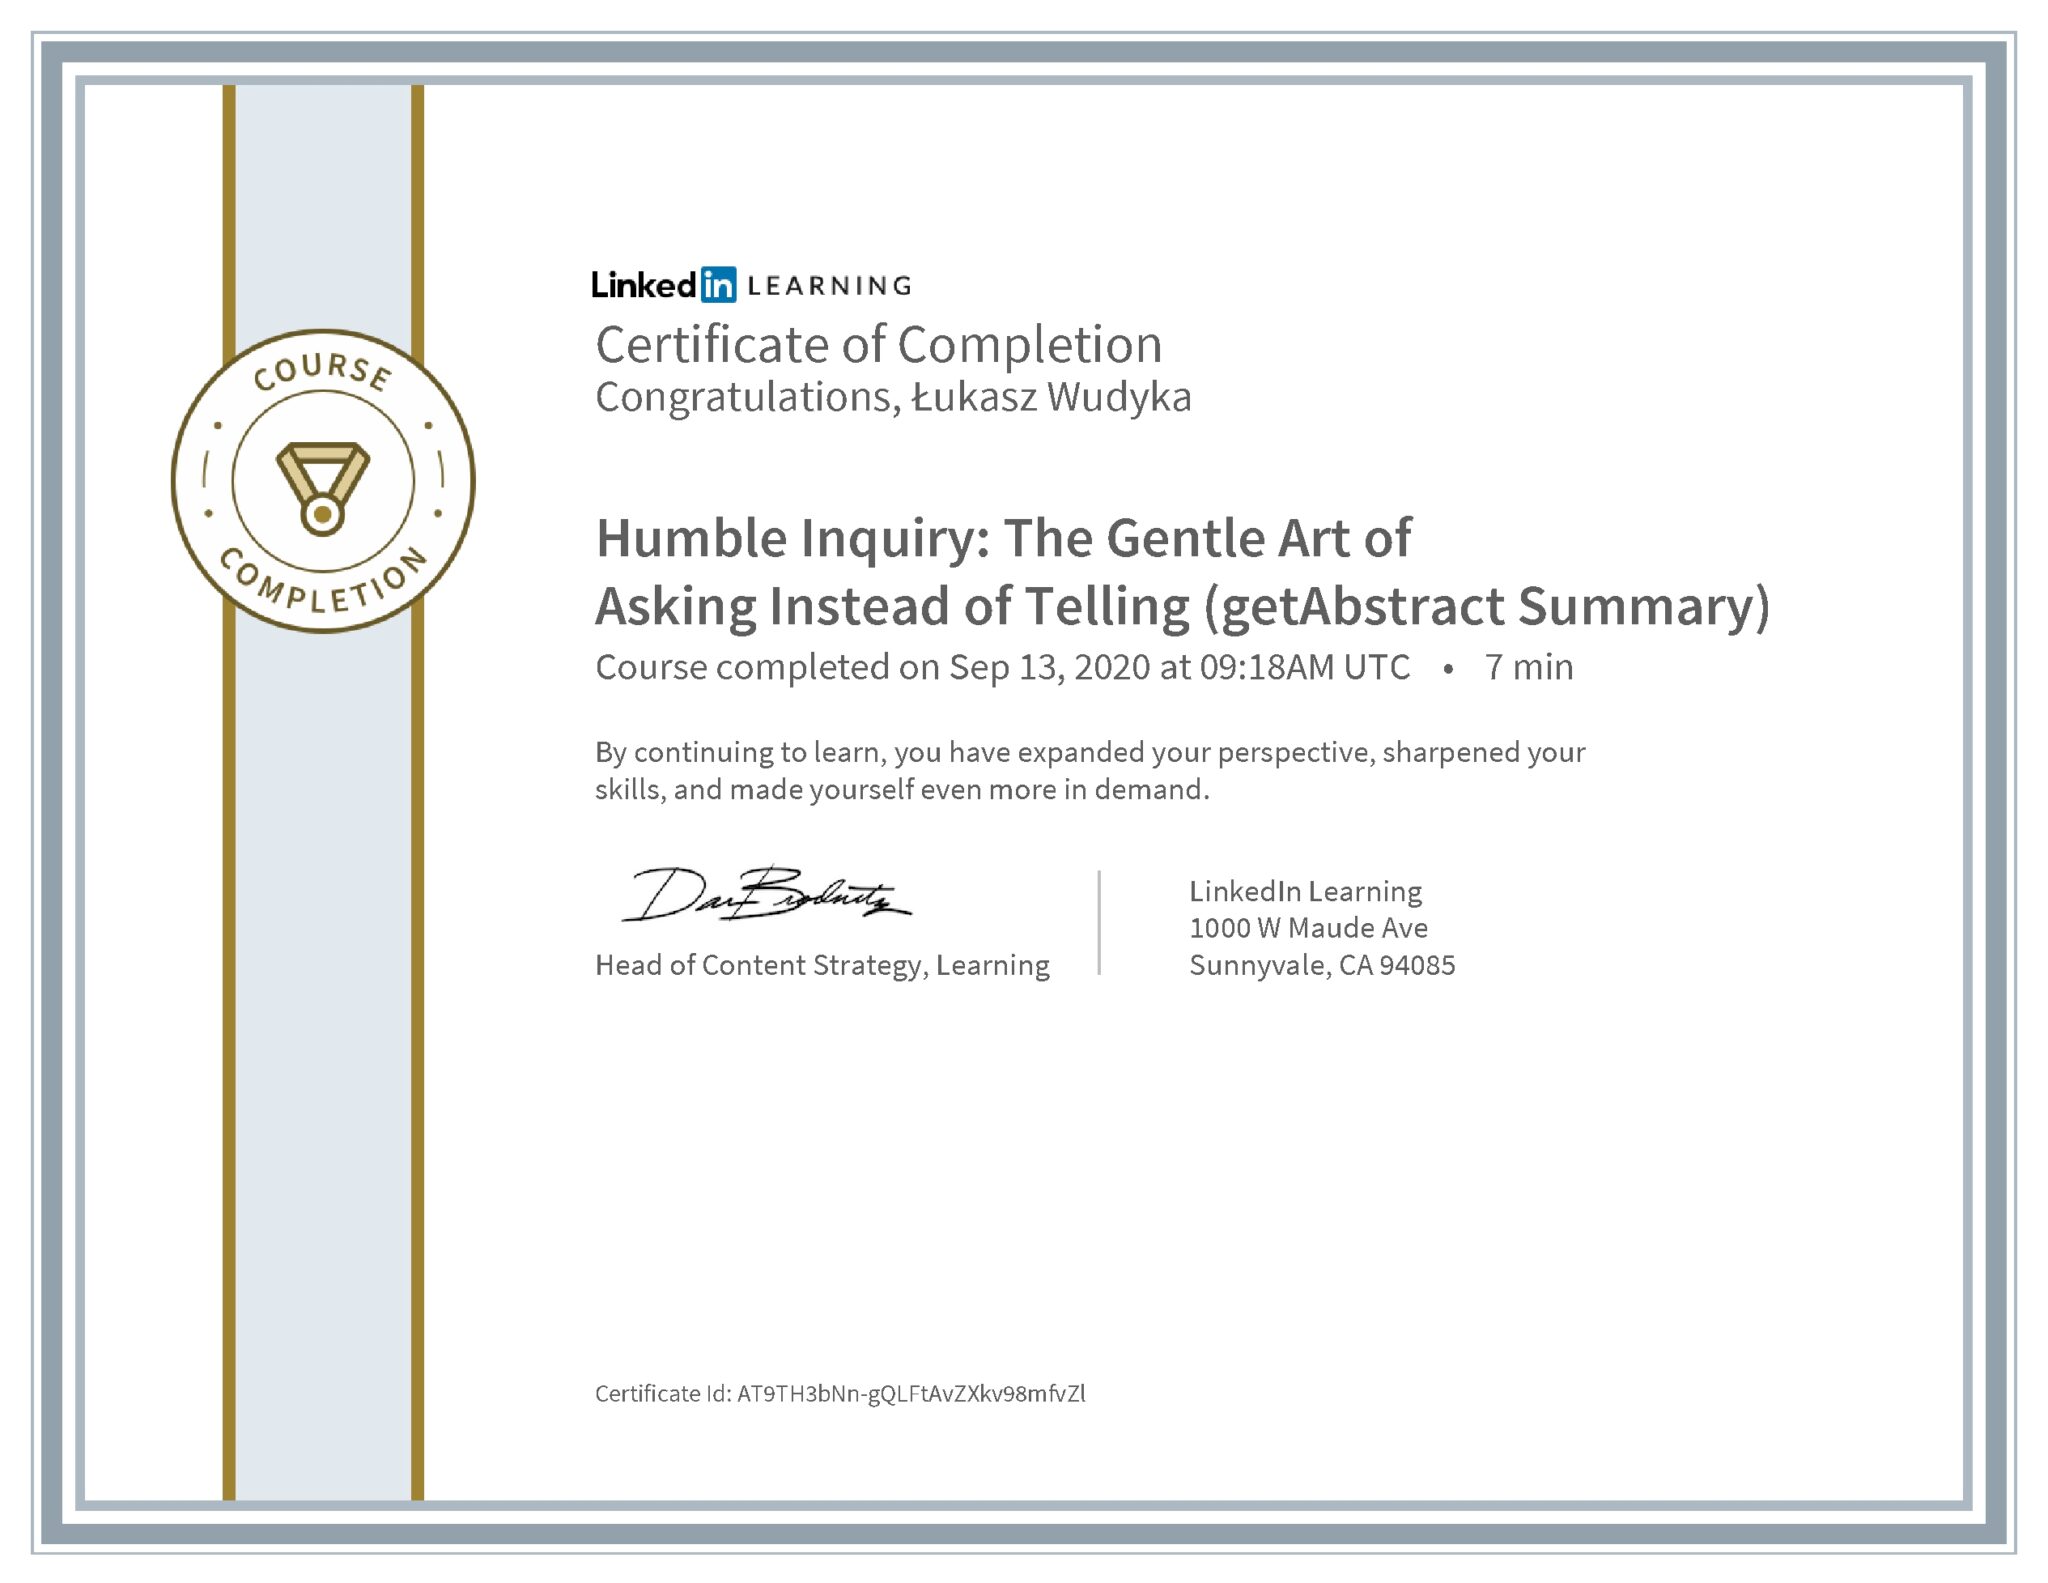 Łukasz Wudyka certyfikat LinkedIn Humble Inquiry: The Gentle Art of Asking Instead of Telling (getAbstract Summary)